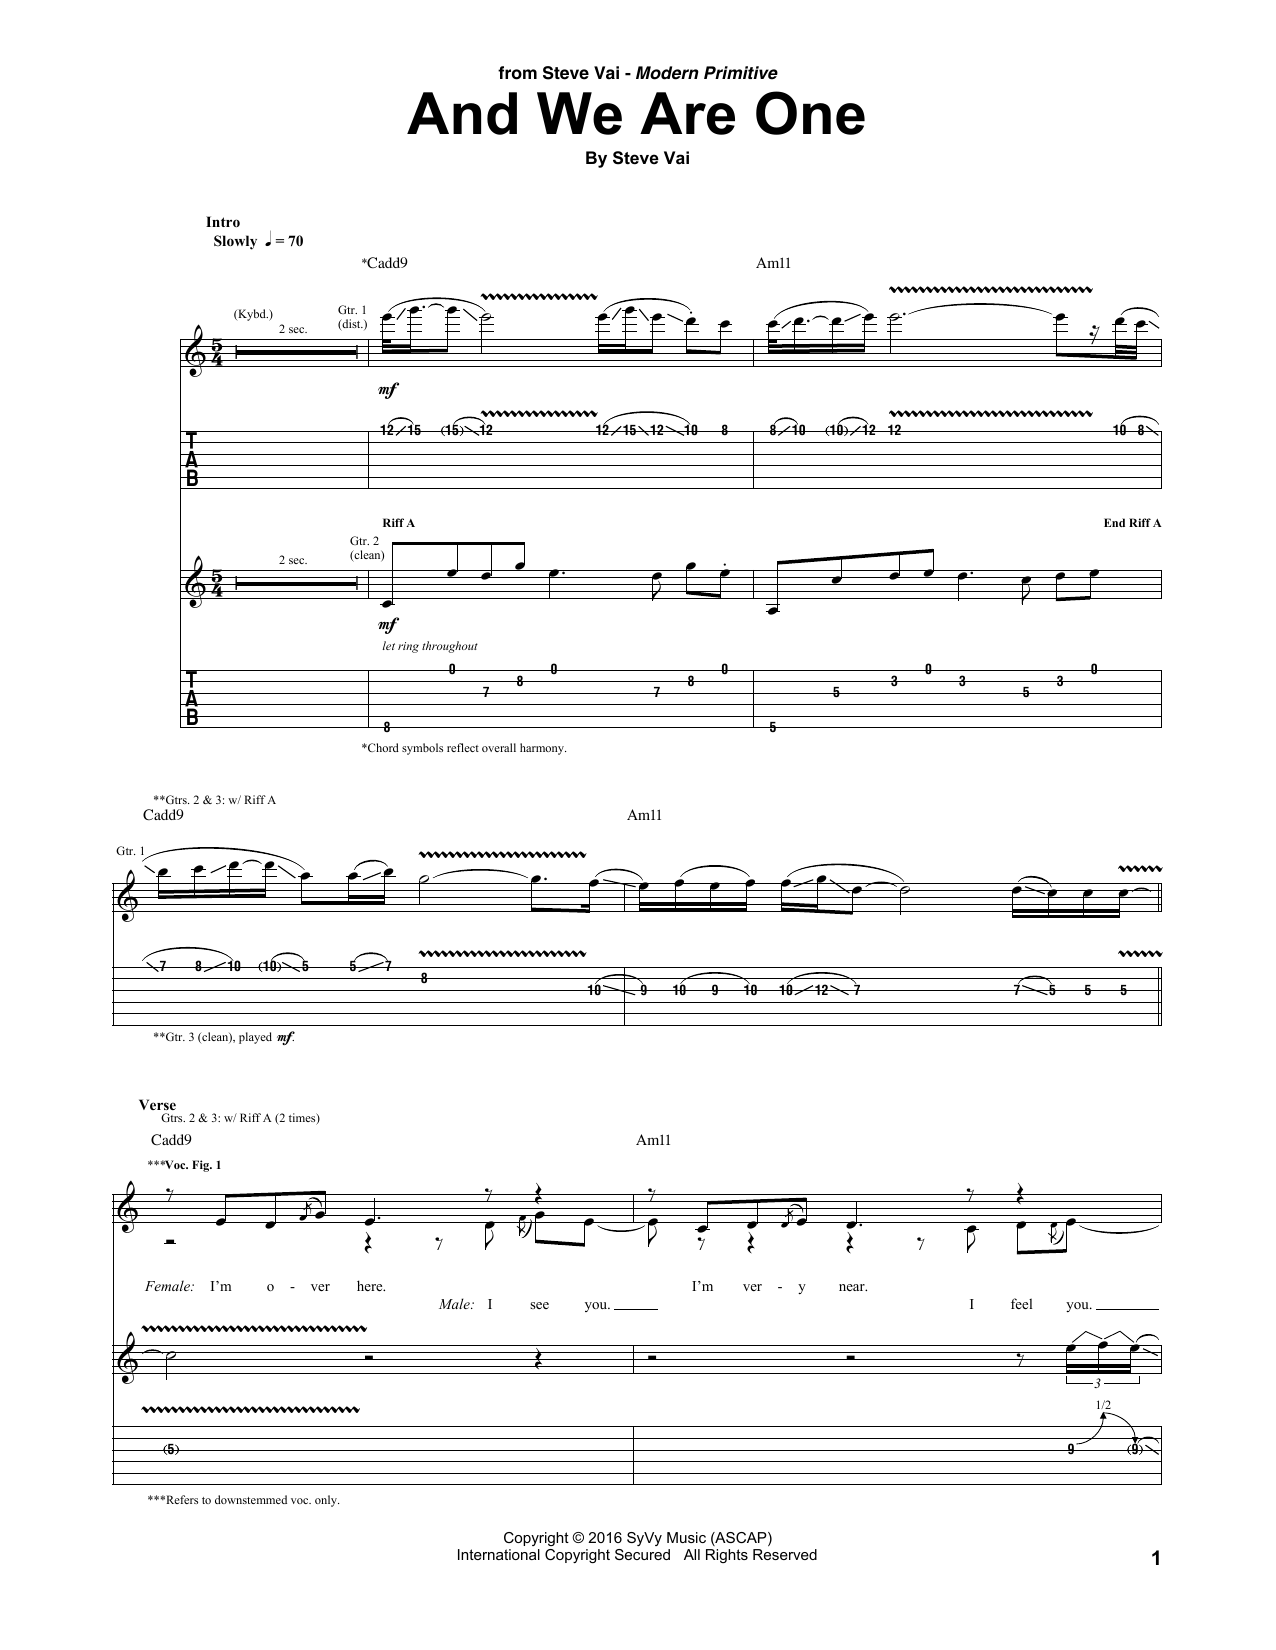 Download Steve Vai And We Are One Sheet Music